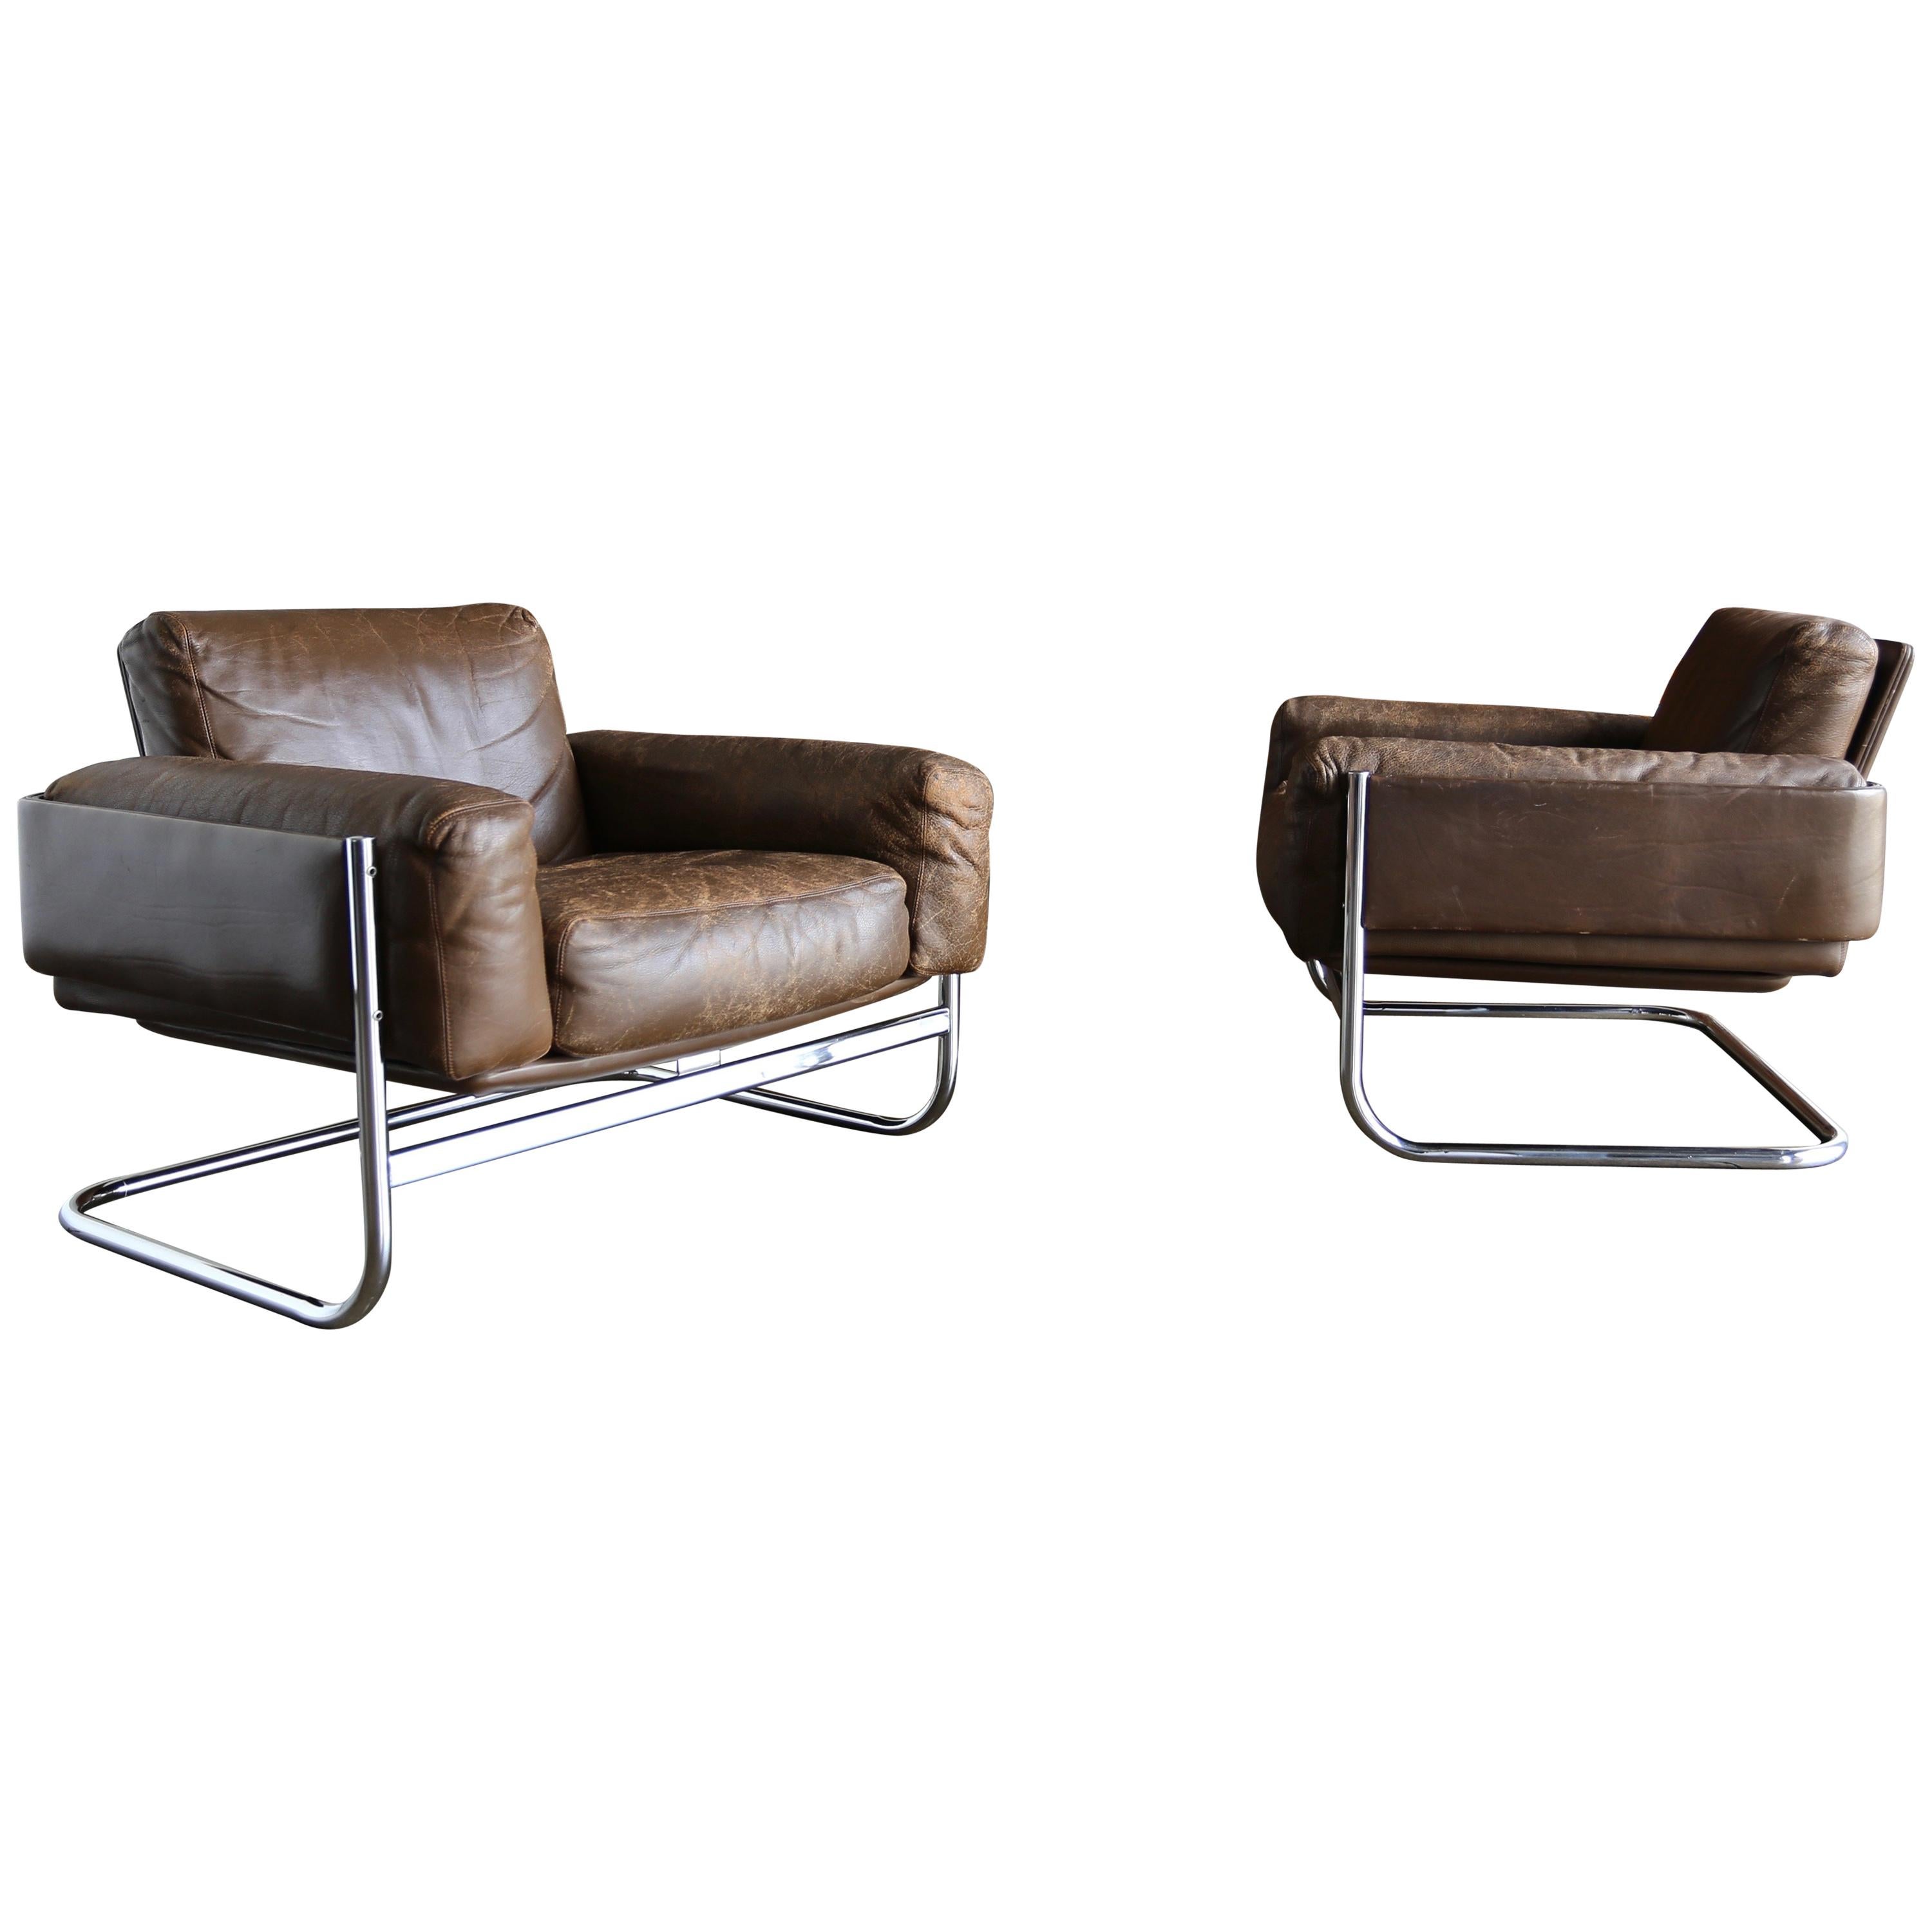 Leather Lounge Chairs by Sven Ivar Dysthe for Dokka Mobler Norway